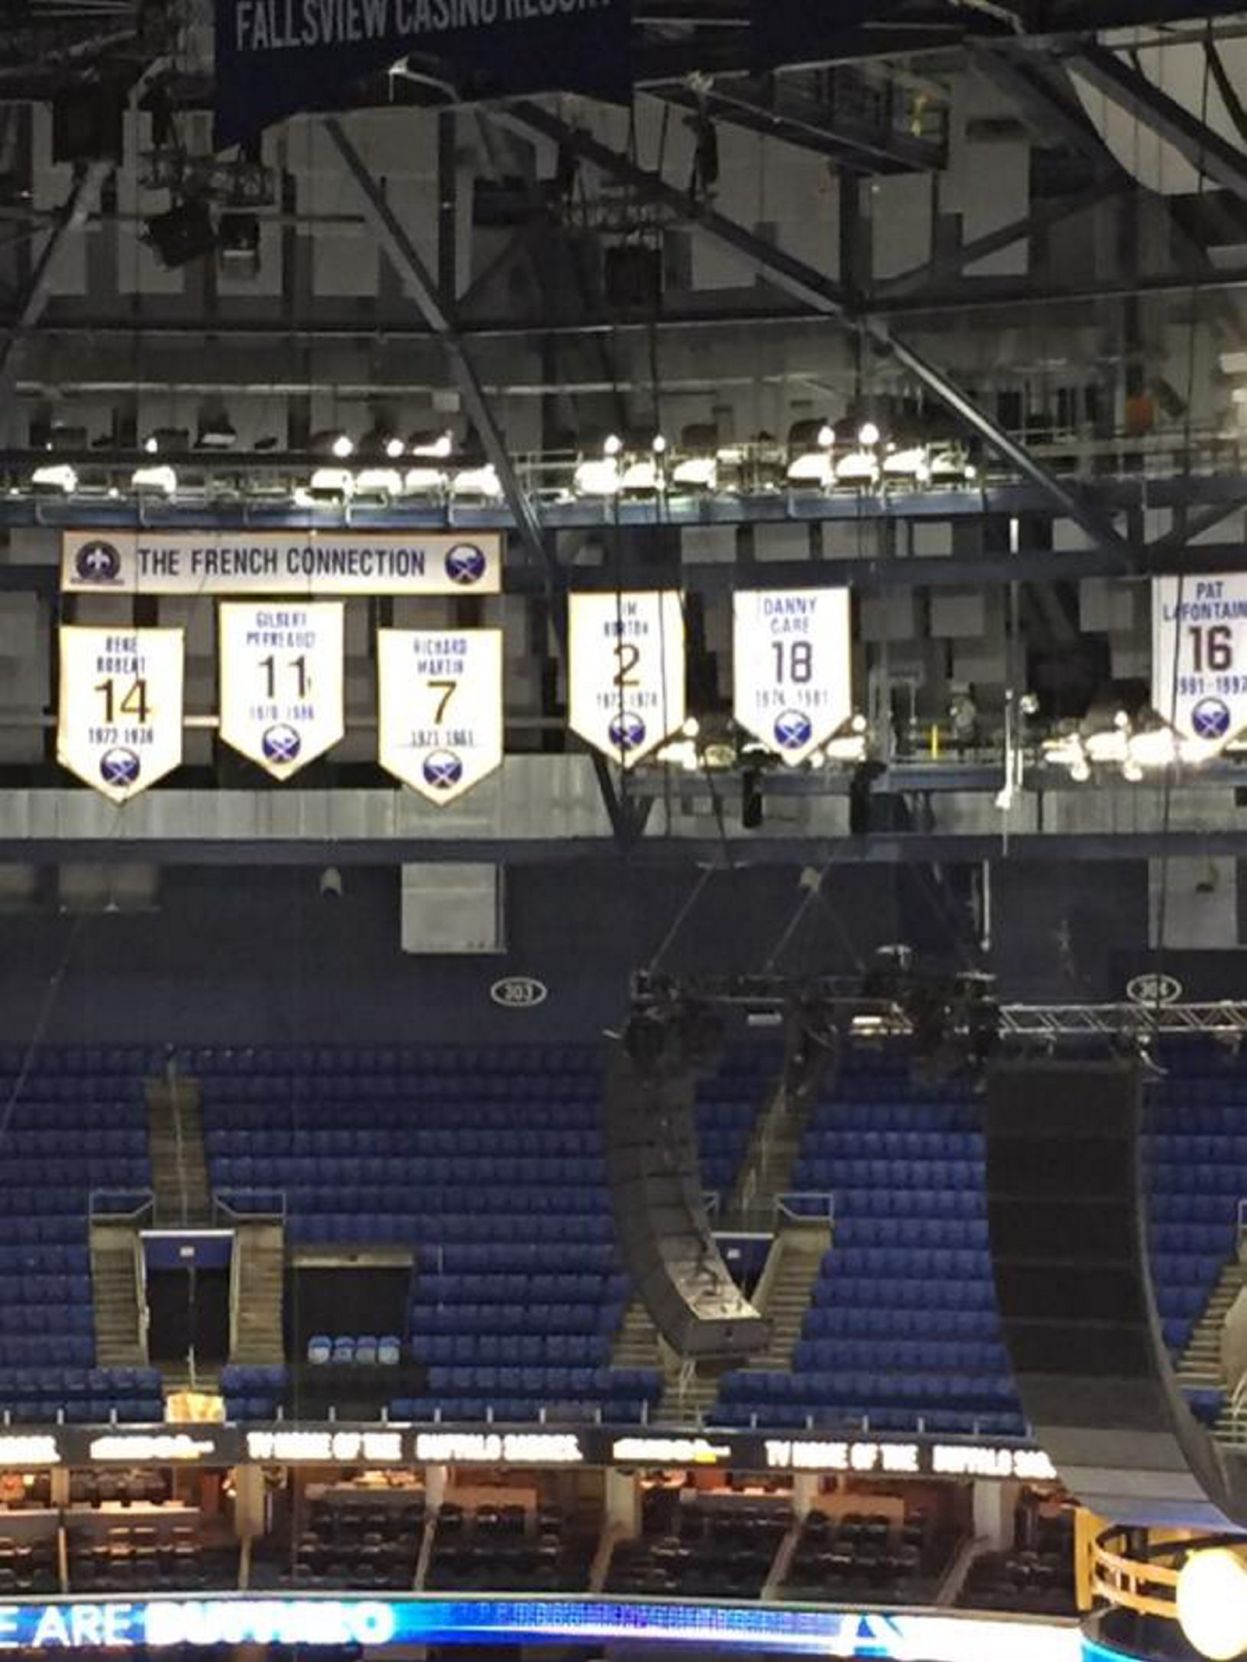 buffalo sabres retired numbers